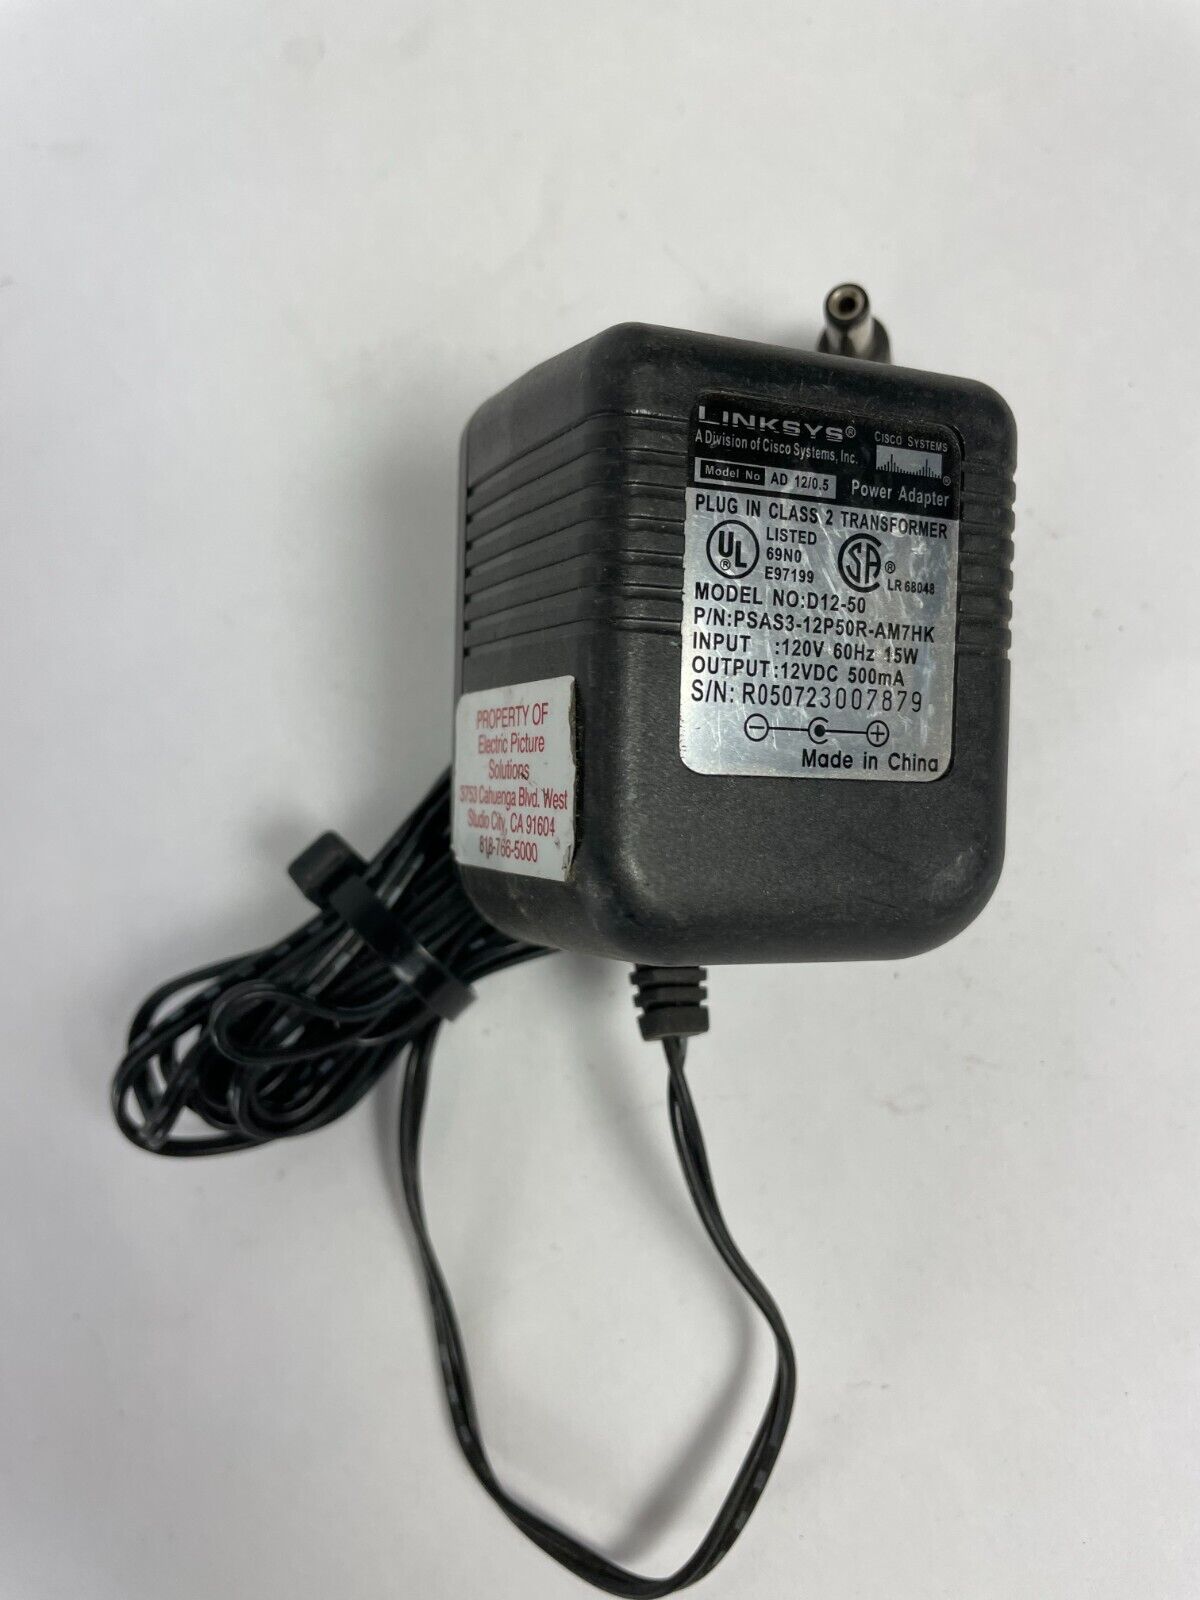 Genuine Linksys D12-50 Adapter Output 12 V 500mA Power Supply Adapter A53